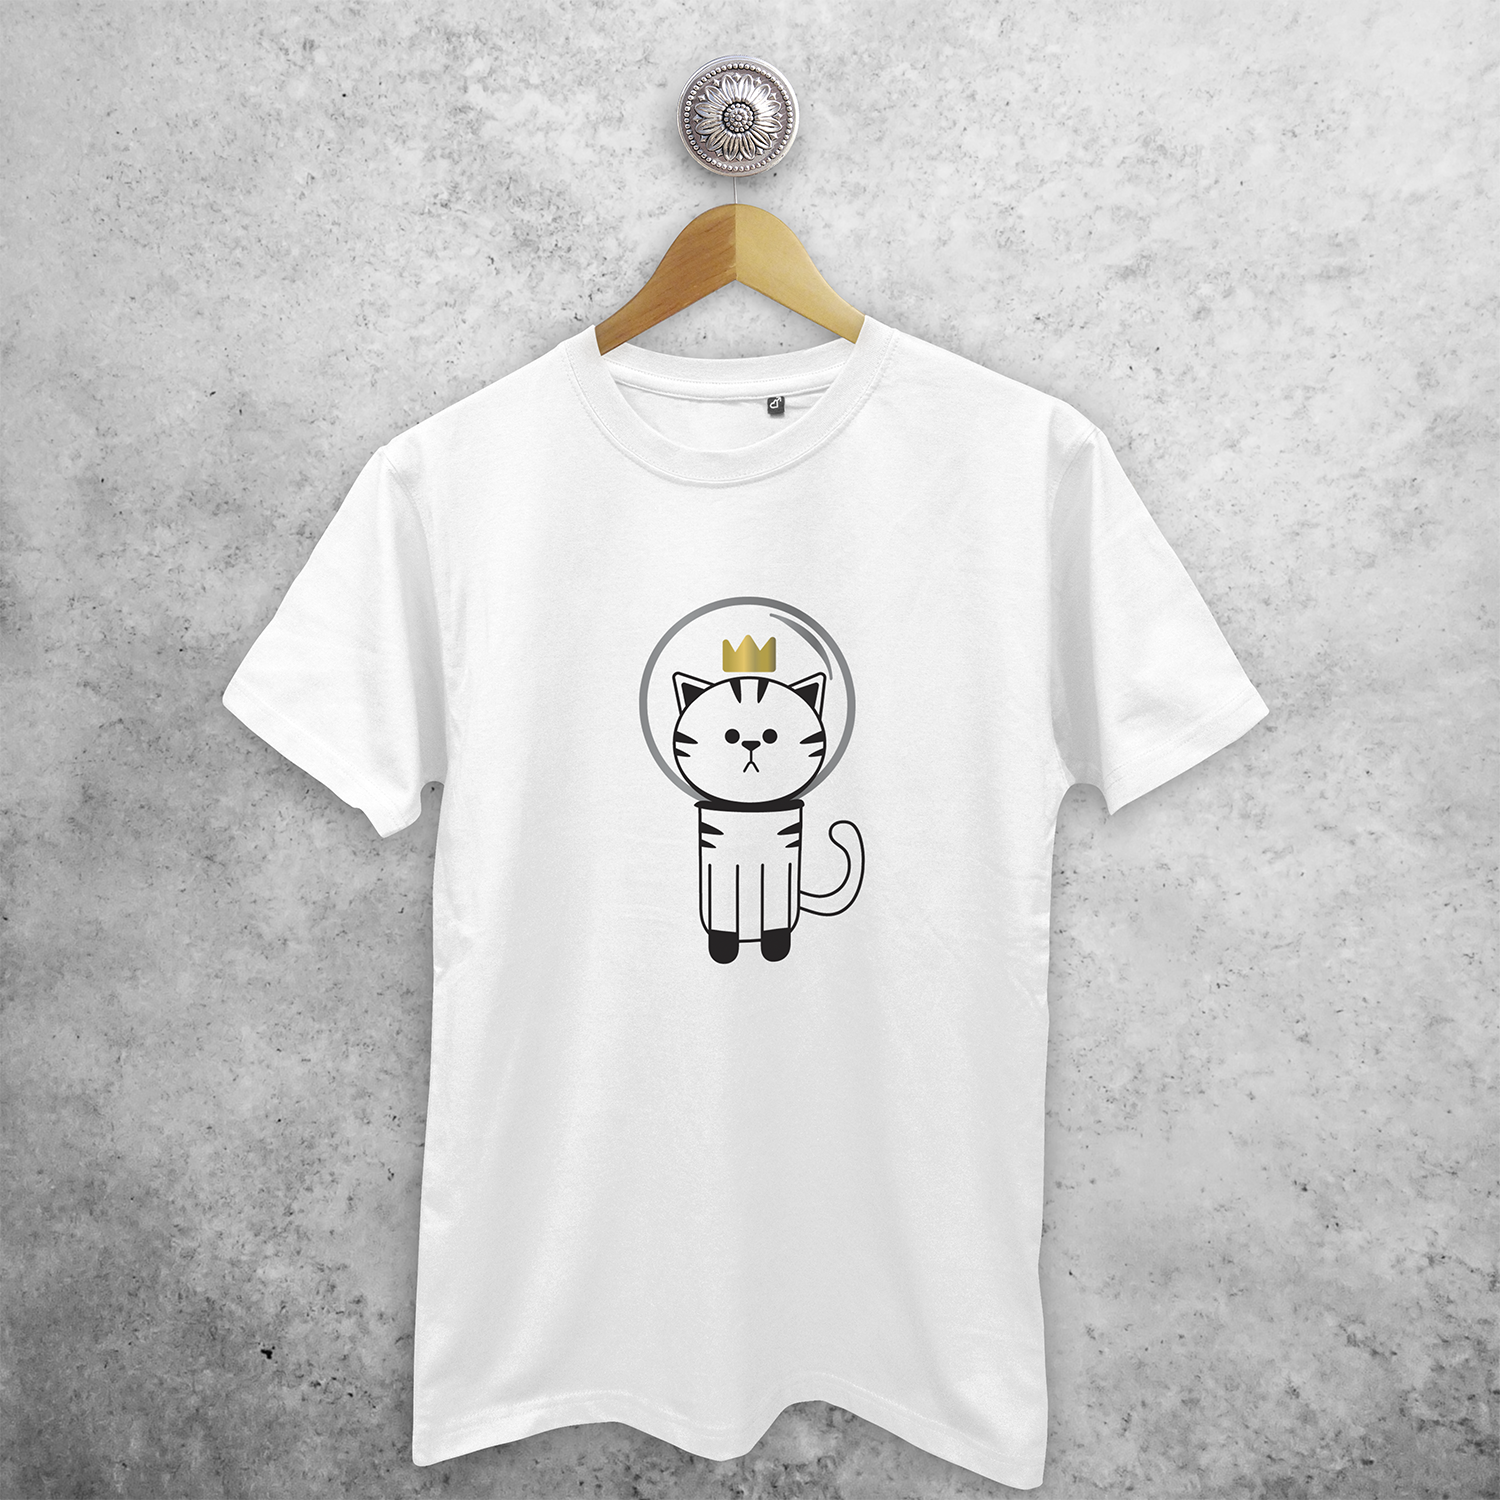 Space cat adult shirt